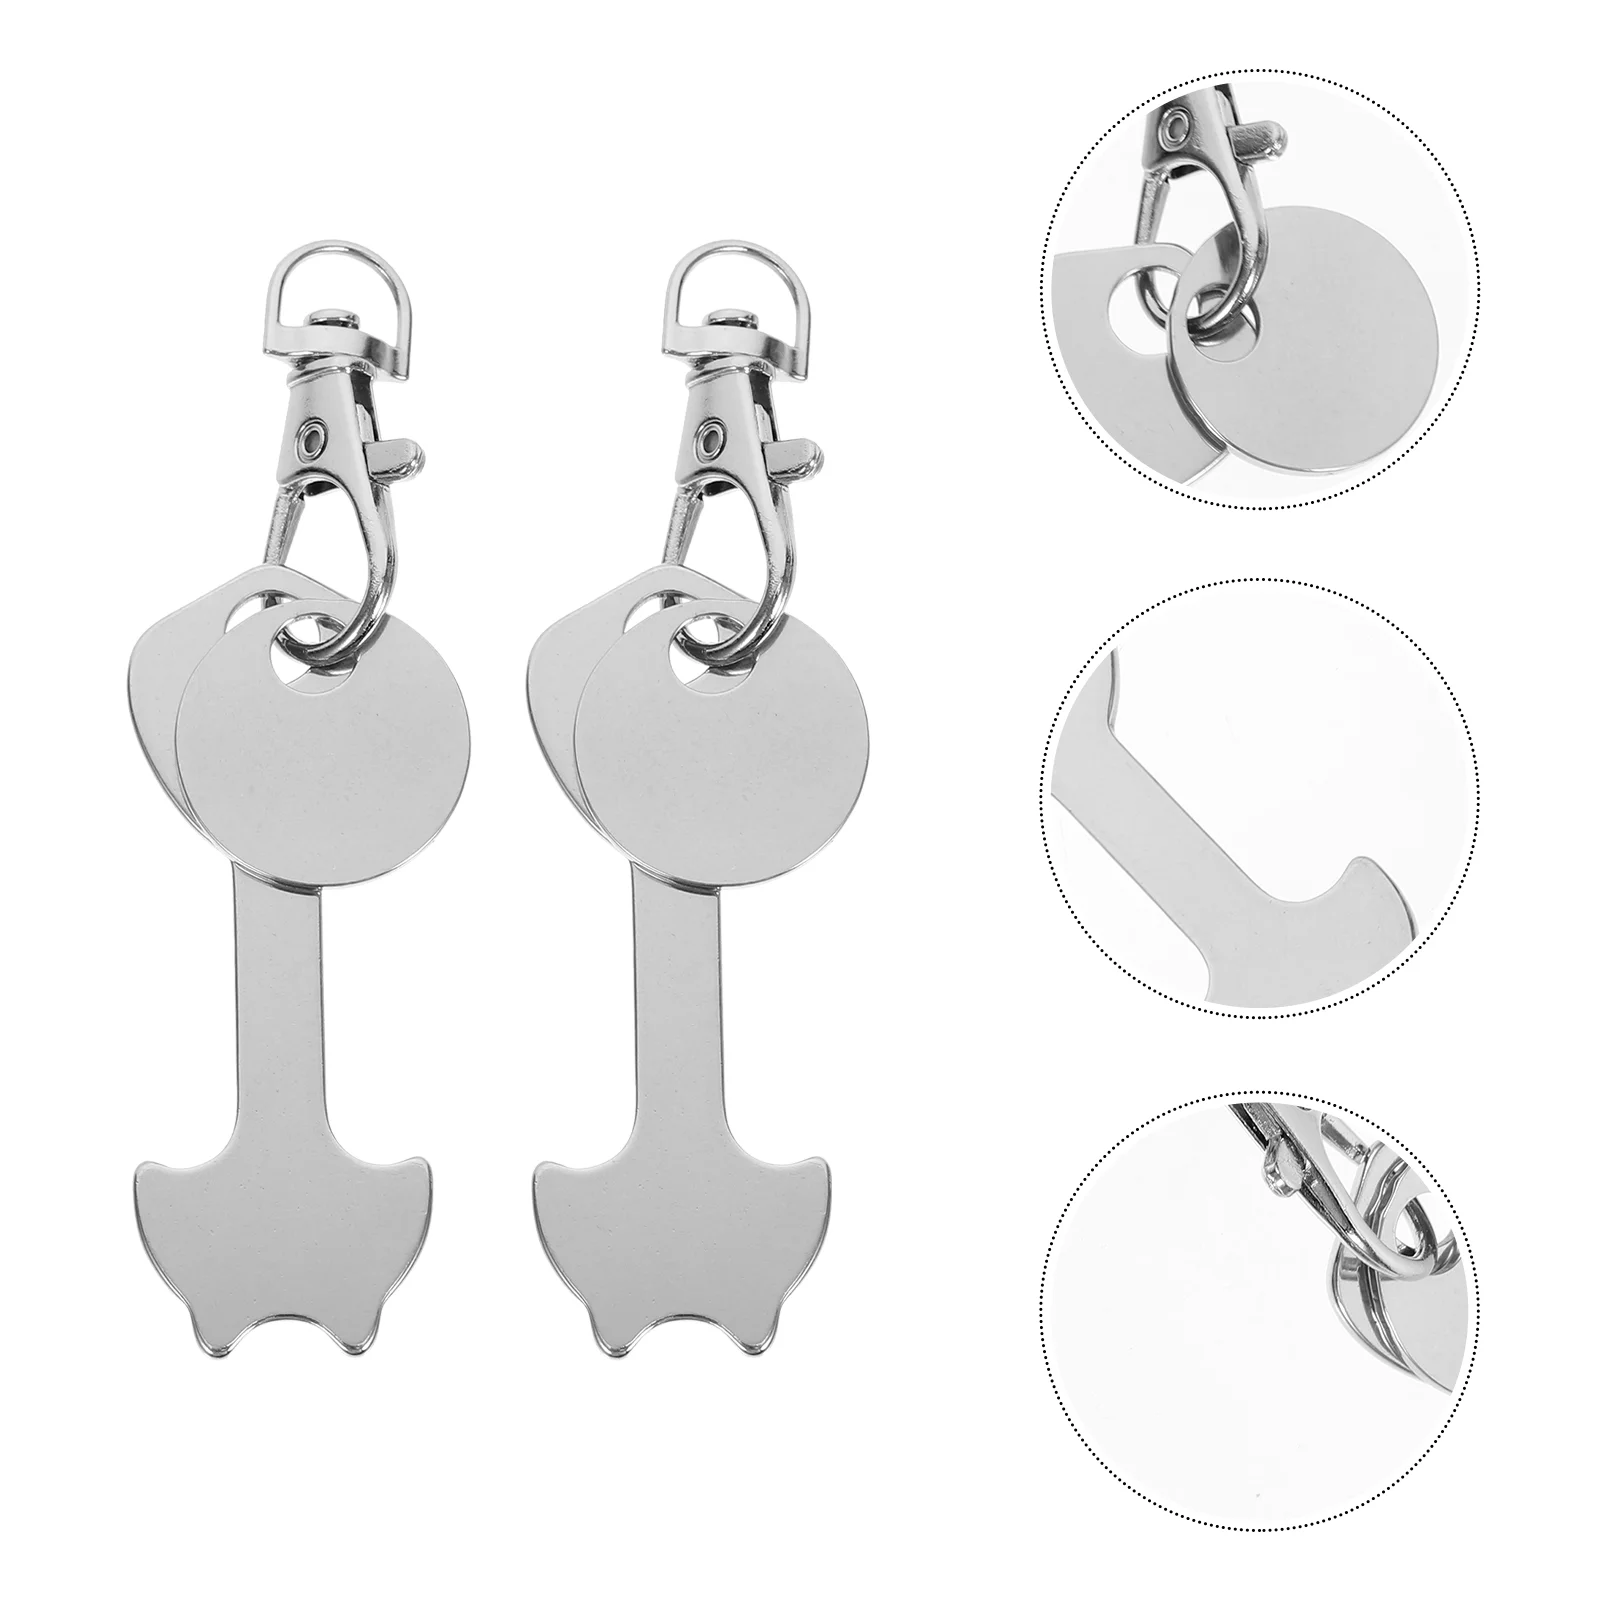 

Shopping Keychain Trolley Cart Tokens Token Coin Key Quarter Metal Steel Stainless Keychains Rings Holder Chain Change Grocery